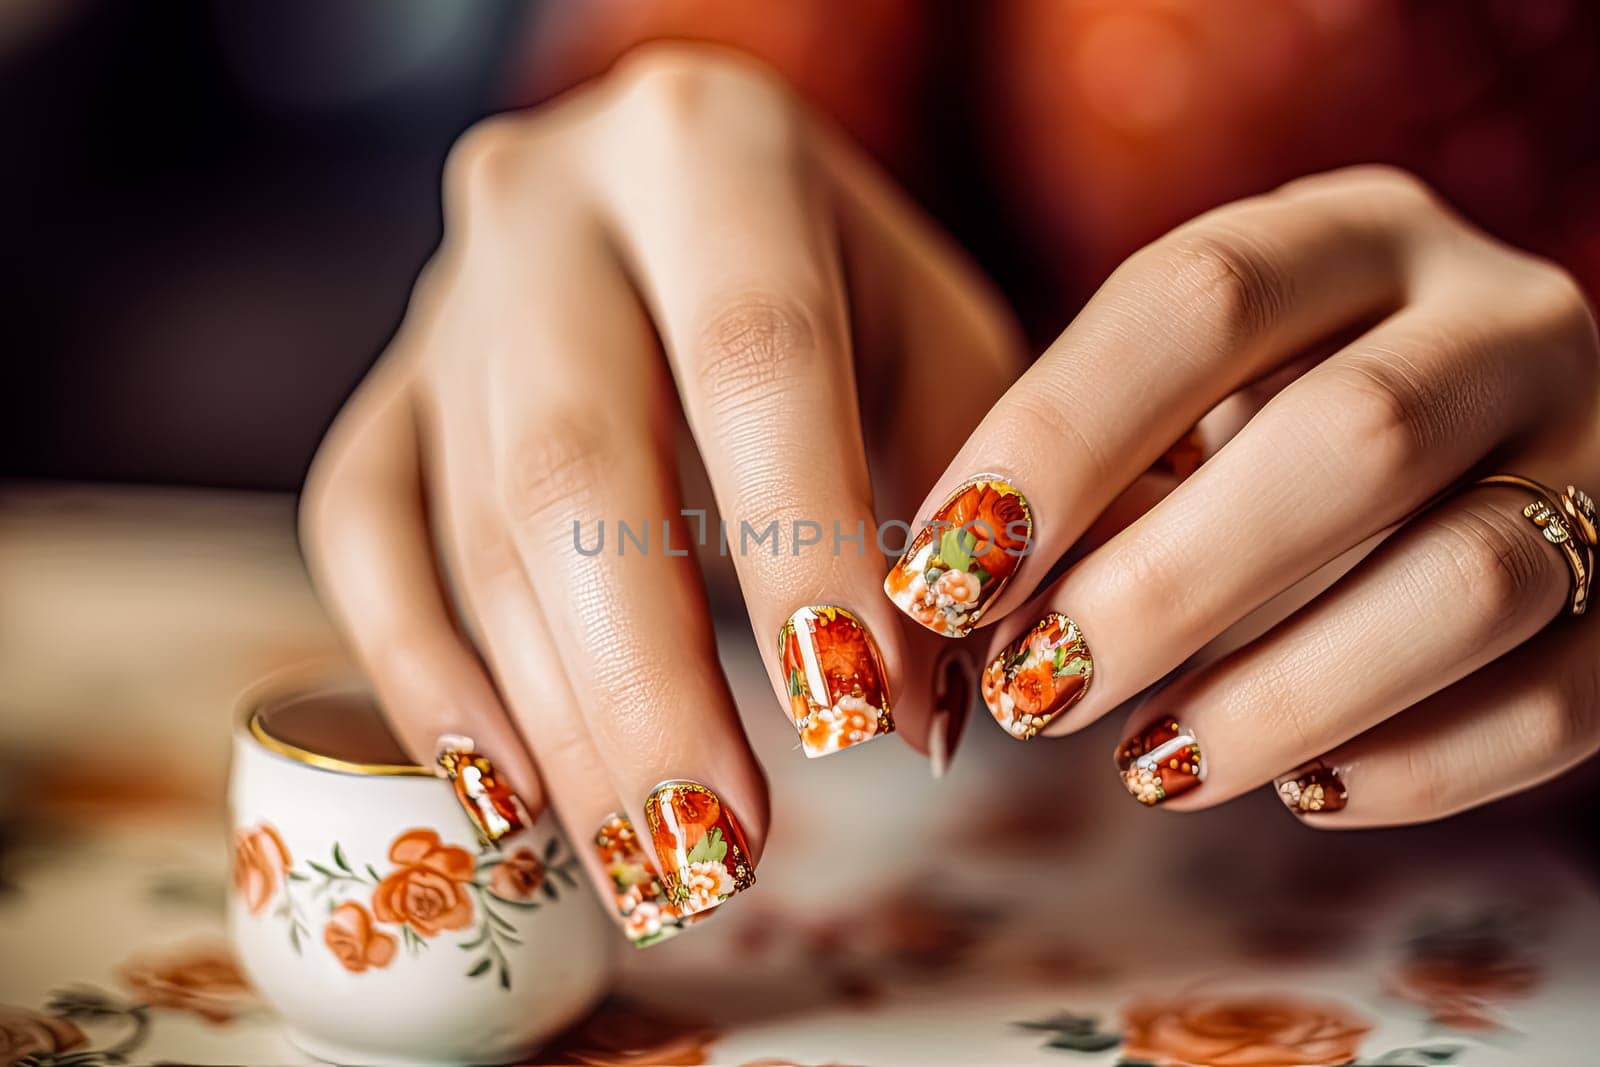 A woman's hands are painted with flowers and leaves, and she is holding a cup. Concept of relaxation and self-care, as the woman takes the time to pamper herself with a manicure